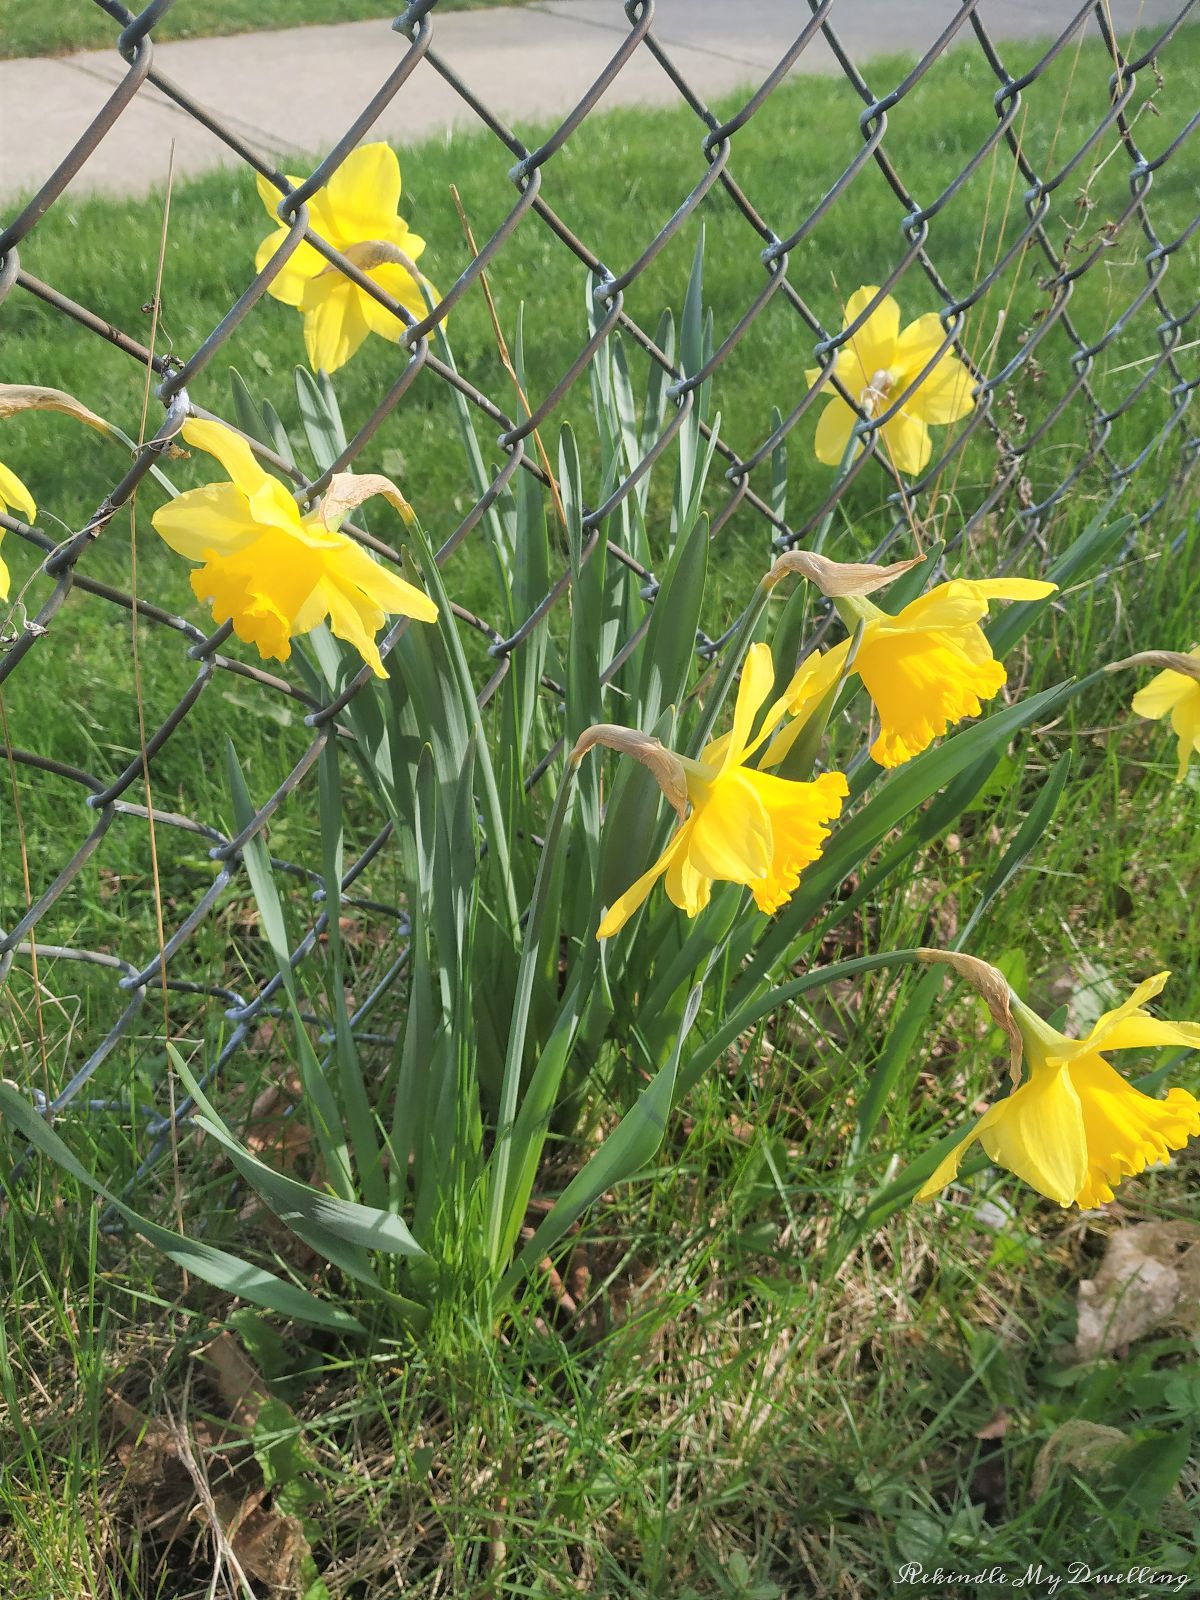 Daffodil flowers next to a fence.